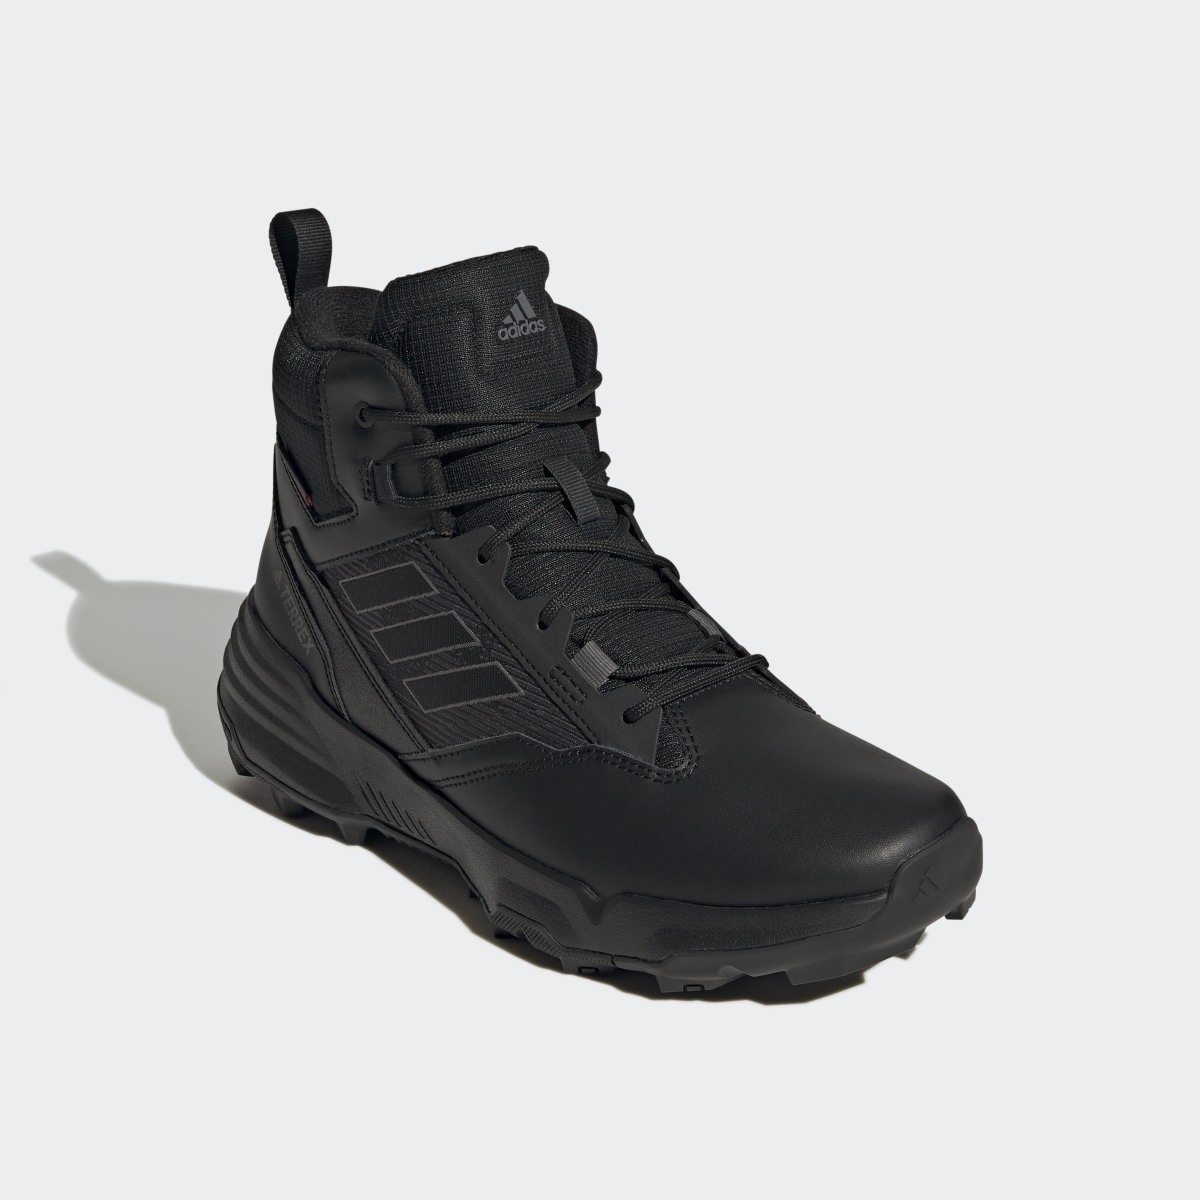 Adidas Unity Leather Mid COLD.RDY Hiking Boots. 7